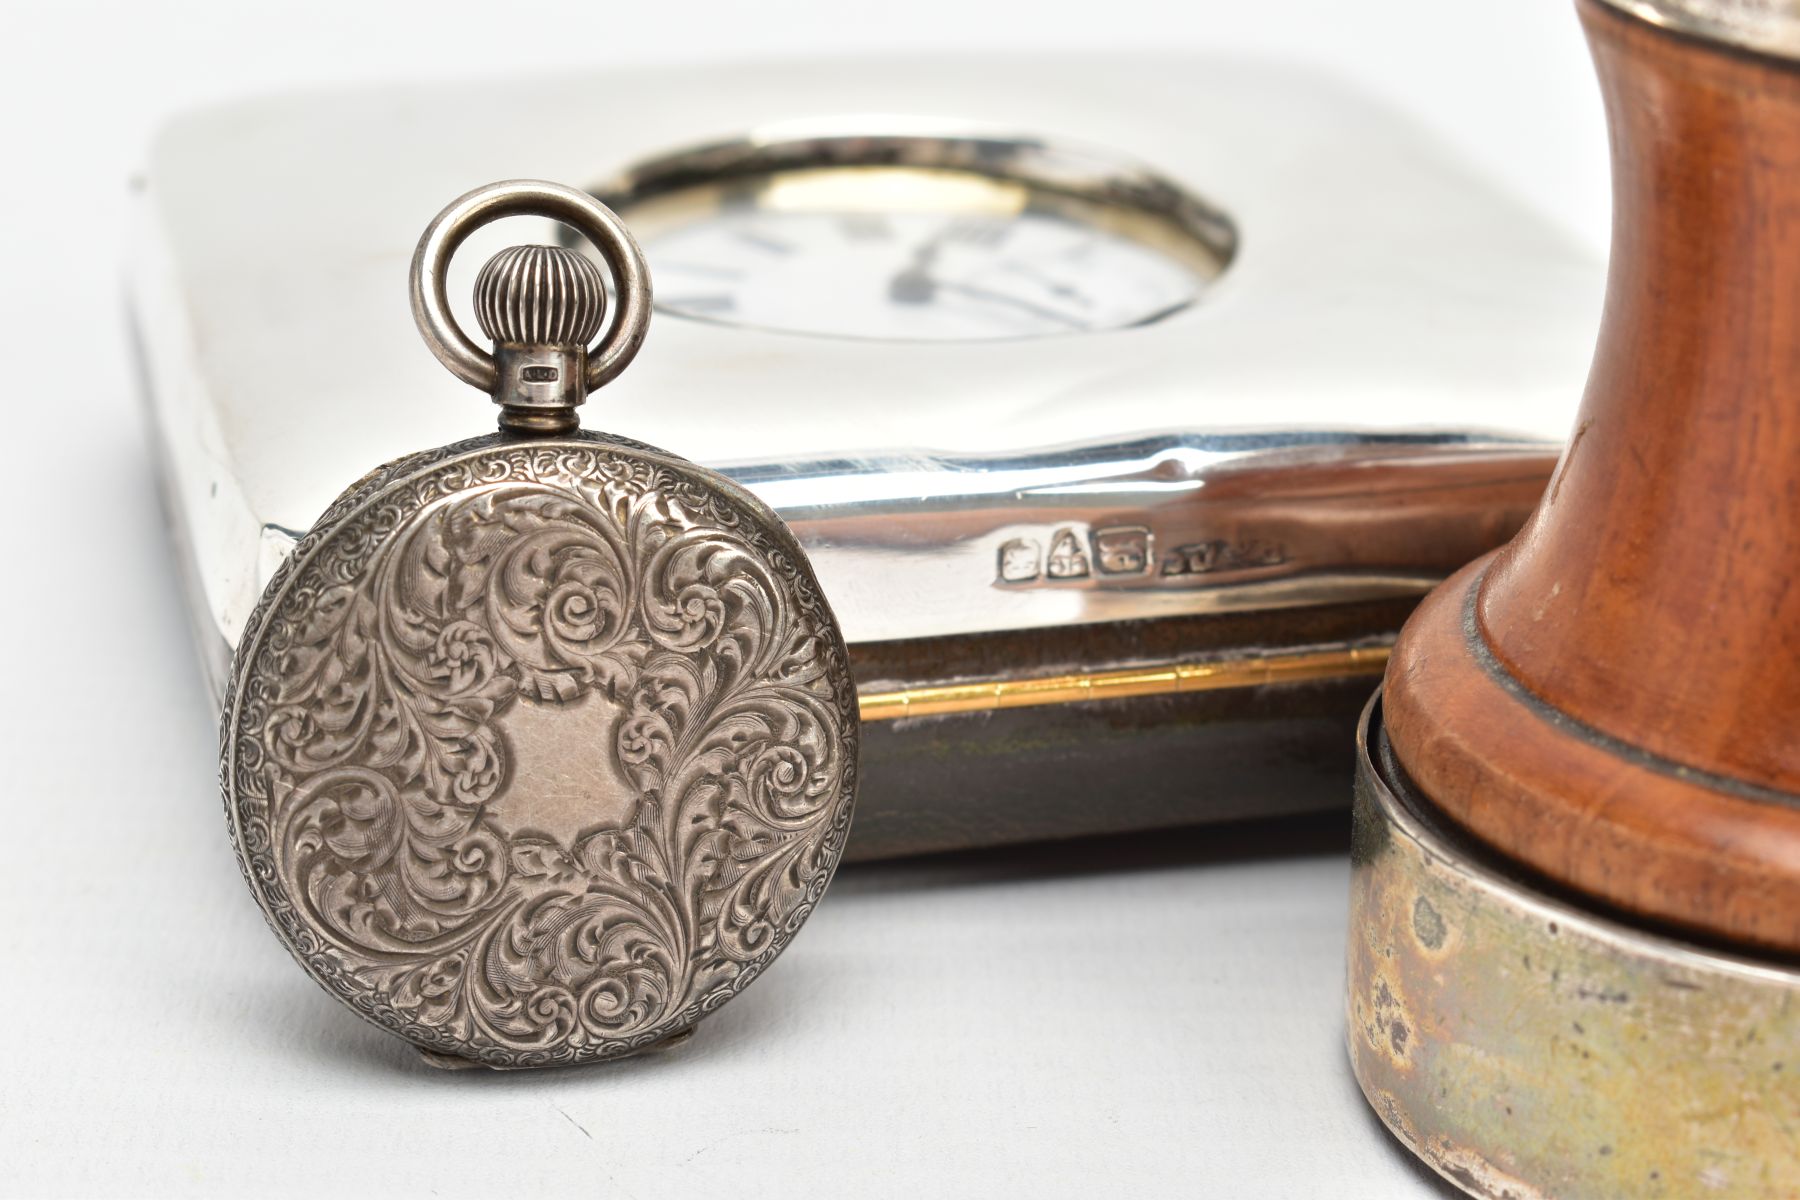 AN OPEN FACE POCKET WATCH WITH CASE, A LADIES SILVER POCKET WATCH AND A SALT MILL, a white metal - Image 3 of 7